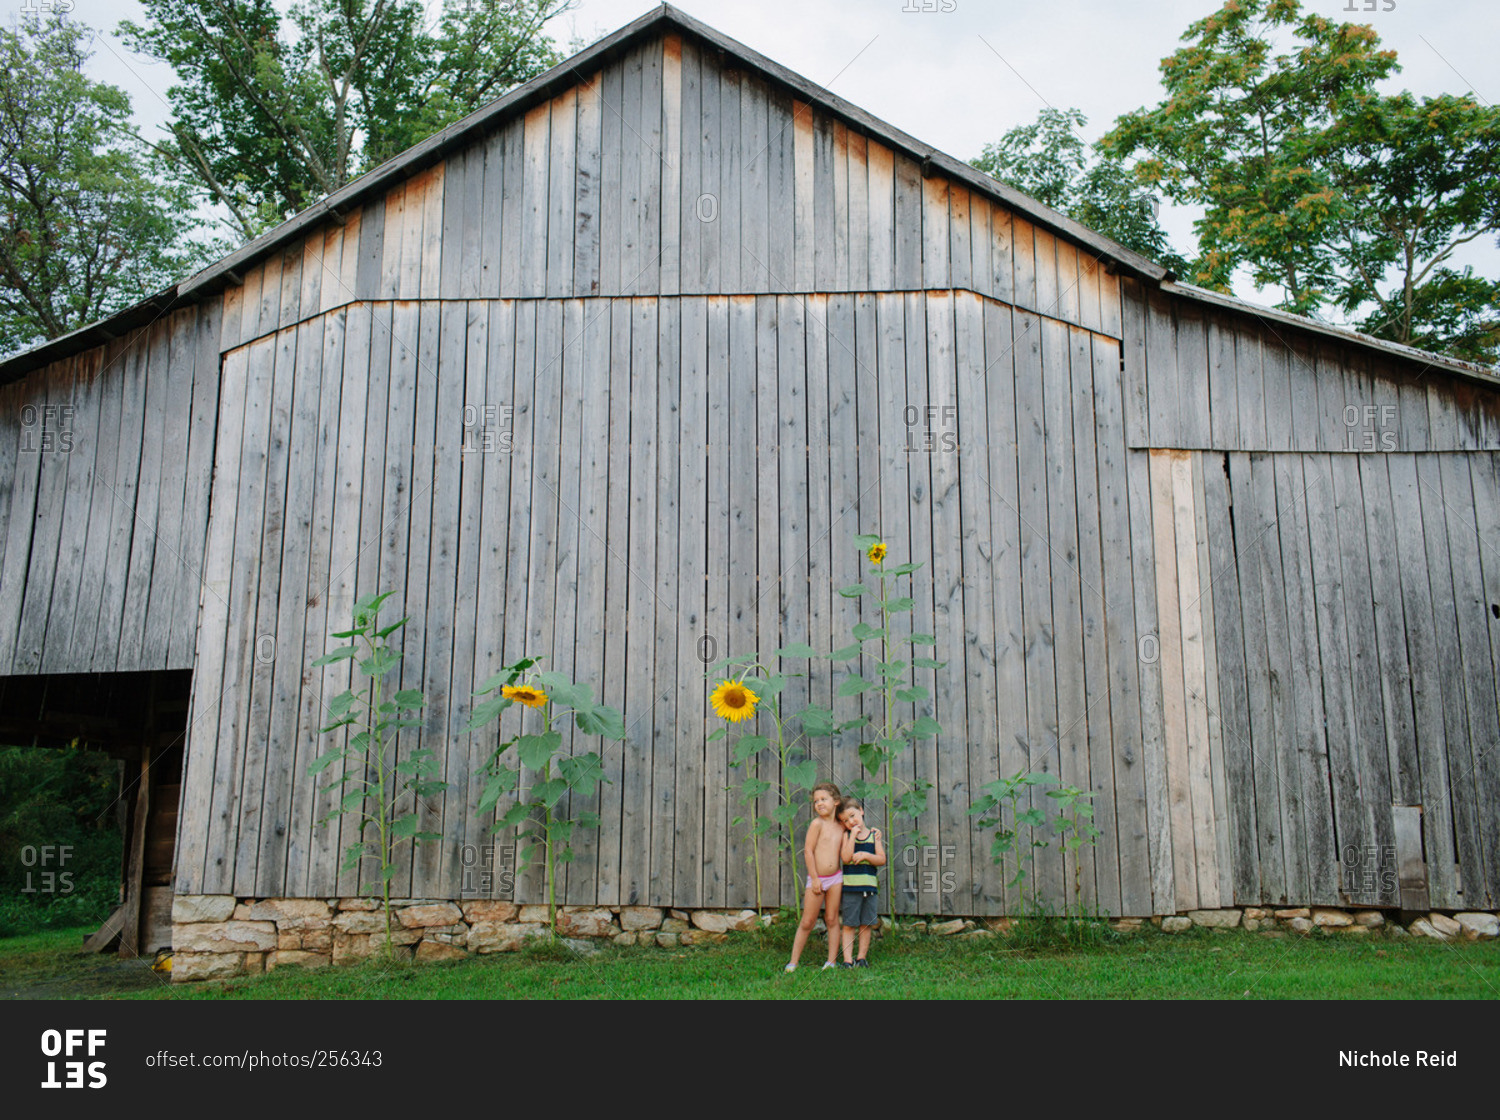 A brother and sister stand in front of towering sunflowers